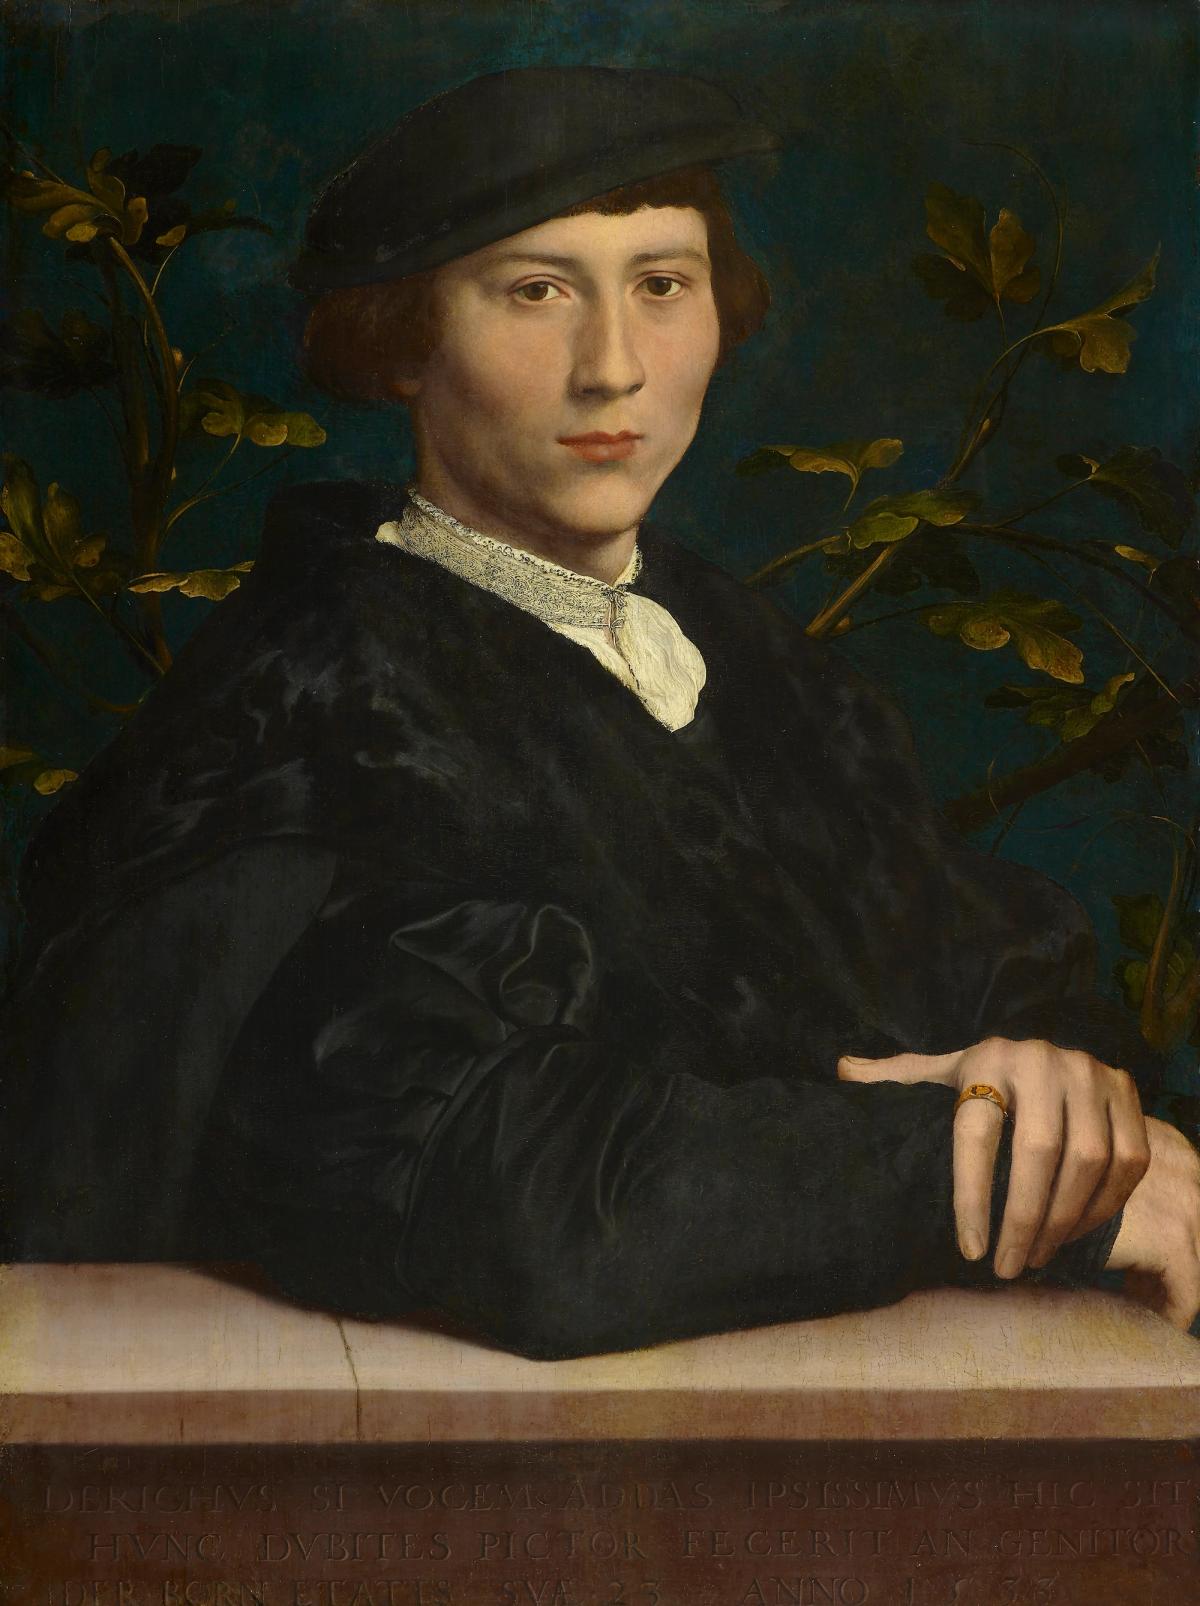 Hans Holbein the Younger, Derich Born (1533)